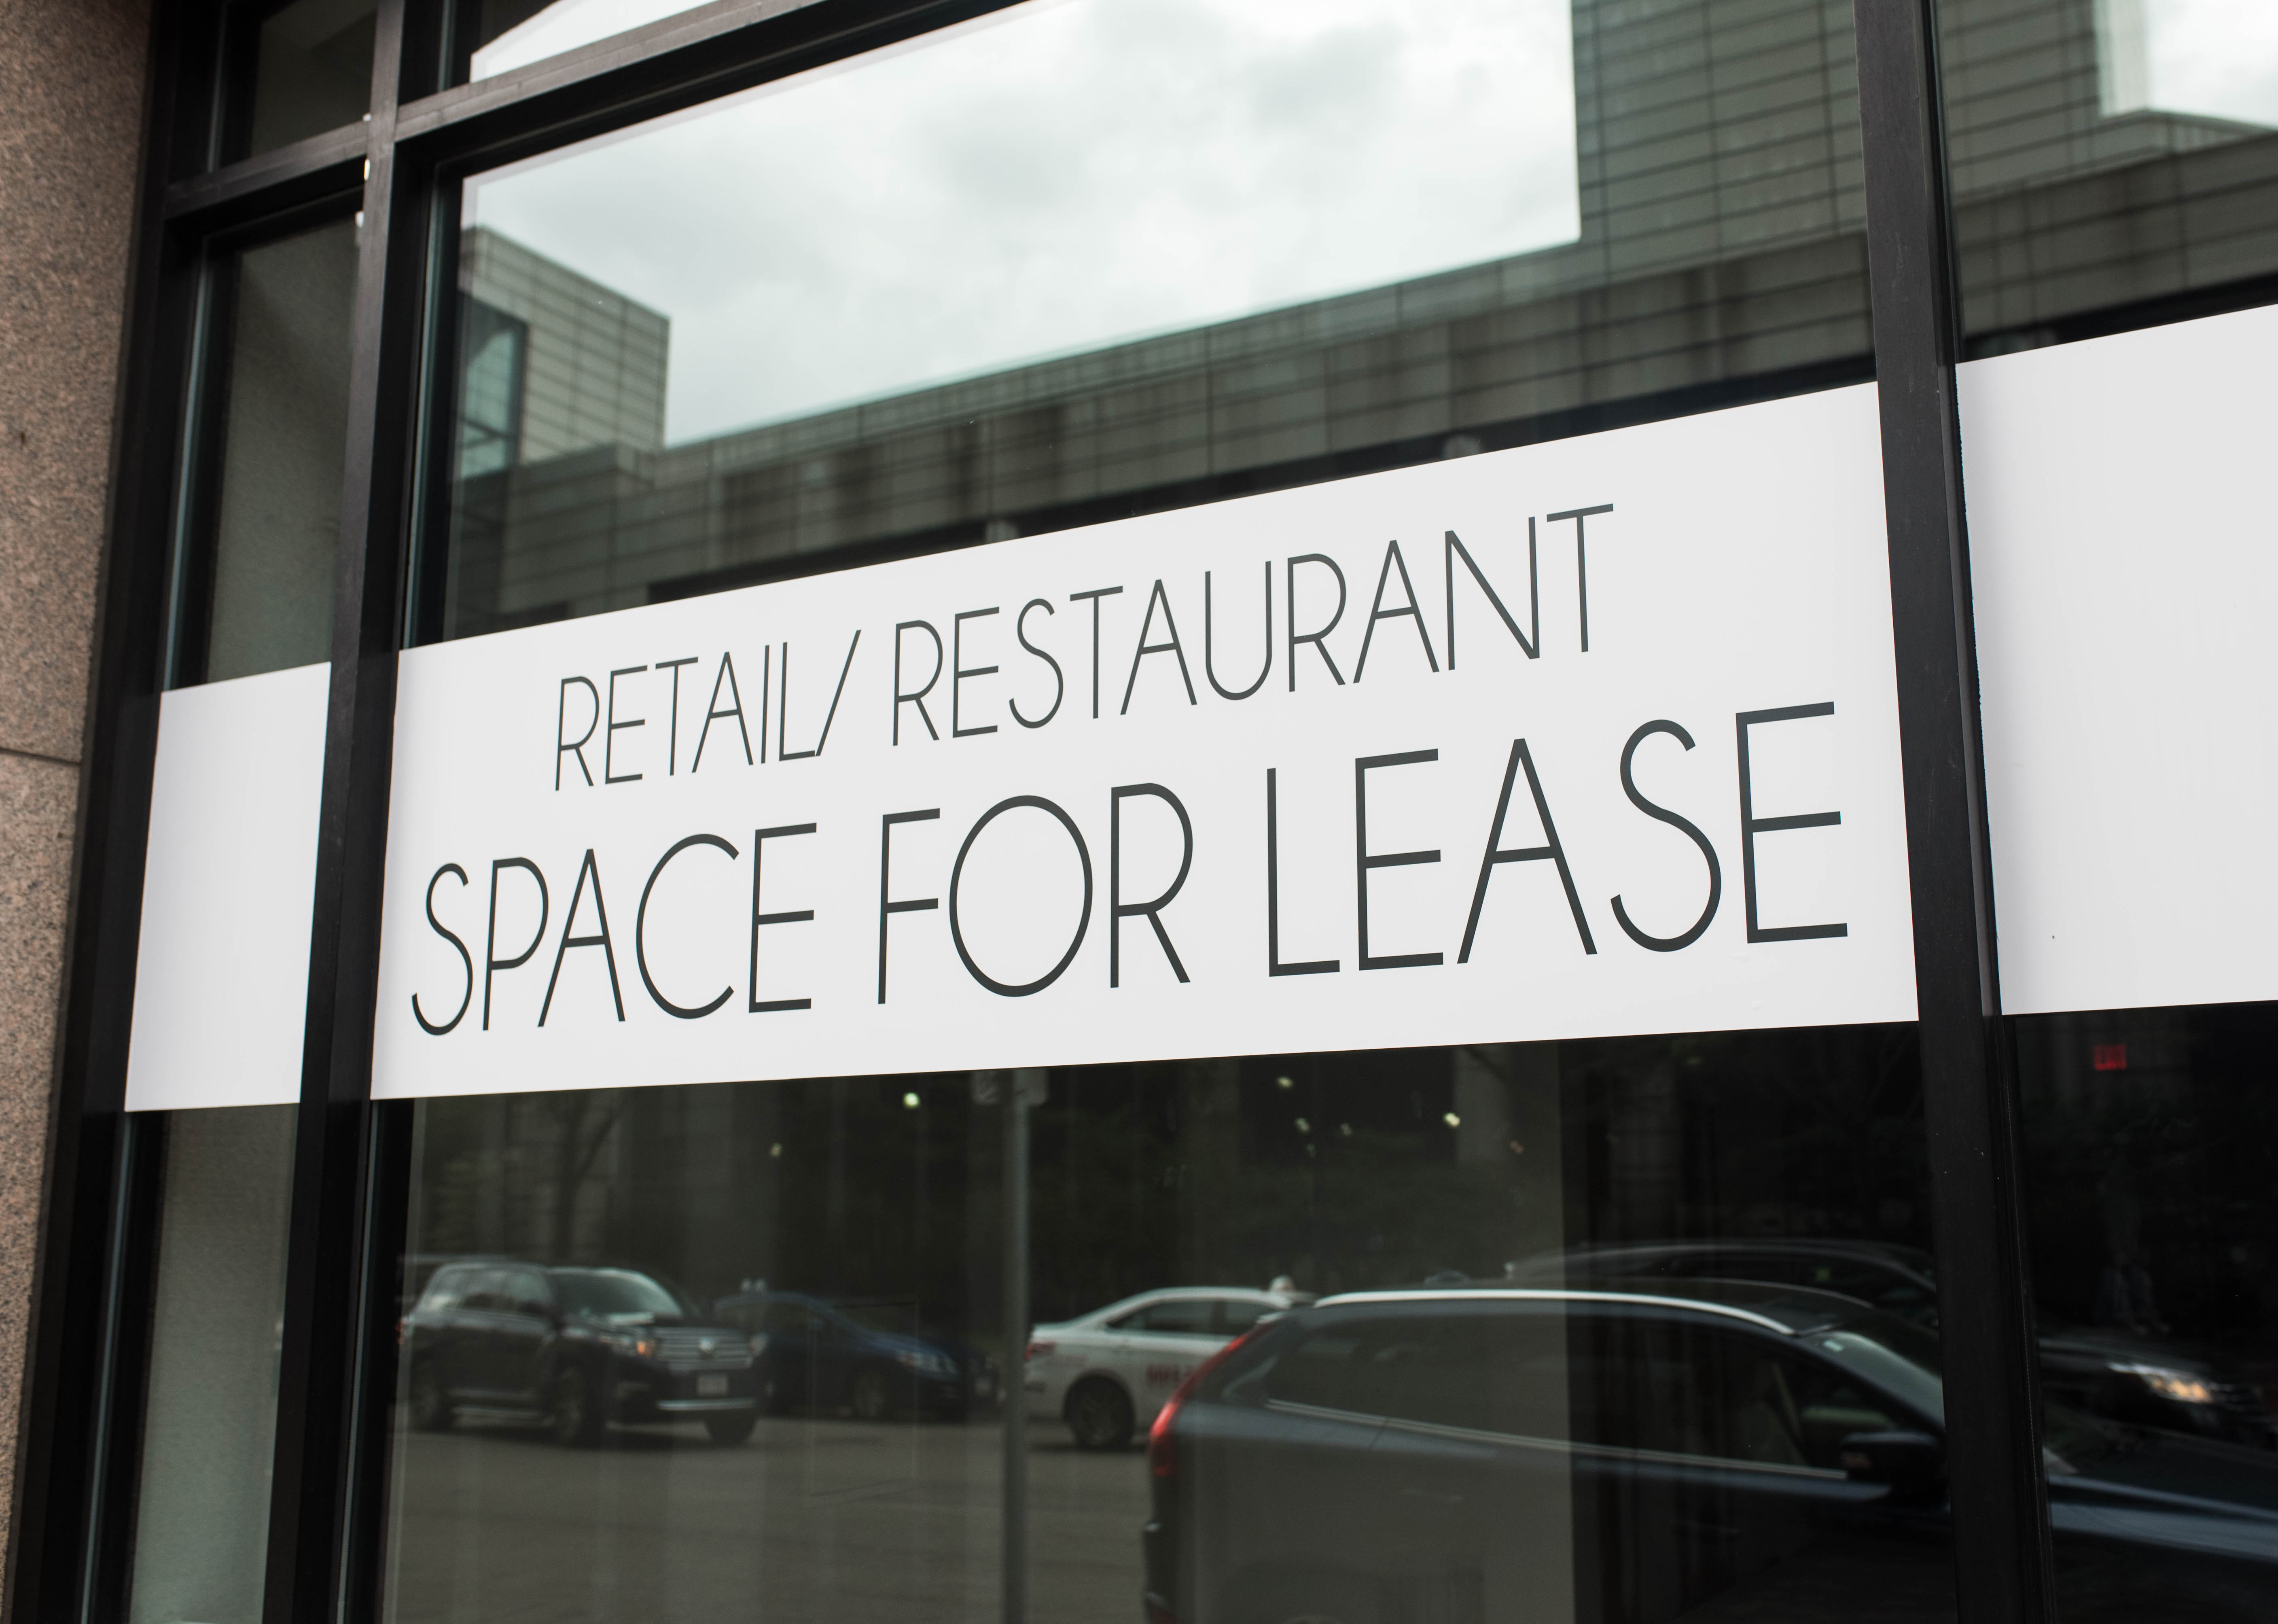 Space for lease glass etching door decal